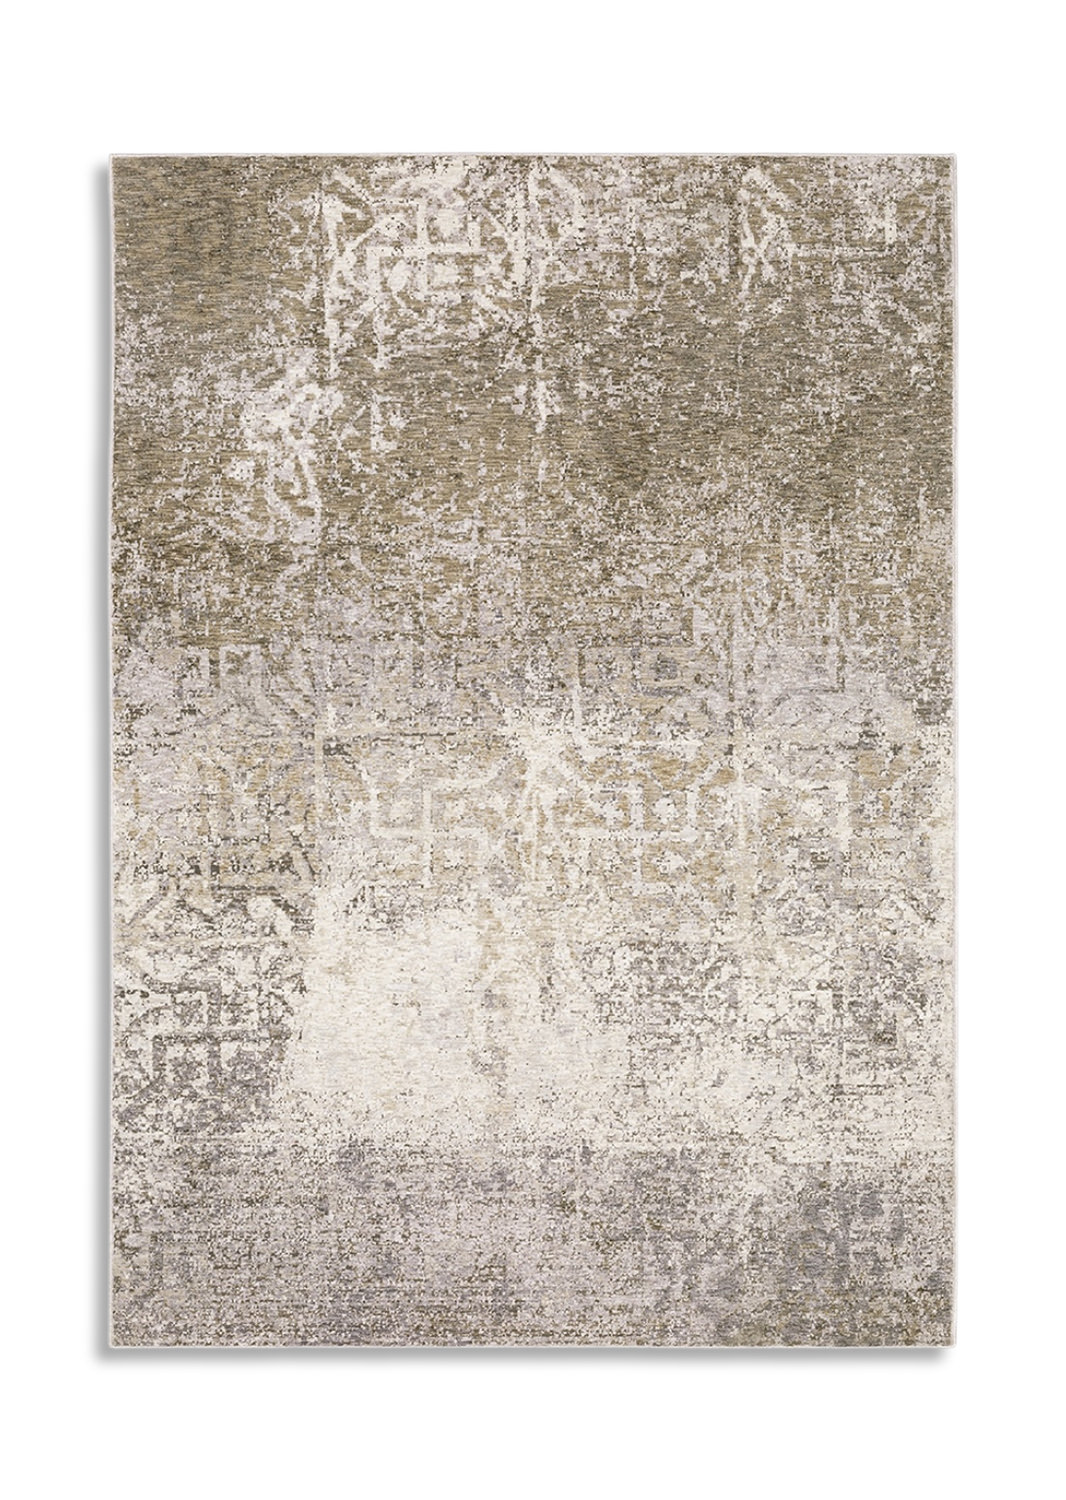 The Un-Rug Abstract Painting - Incredible Low-Profile Floor